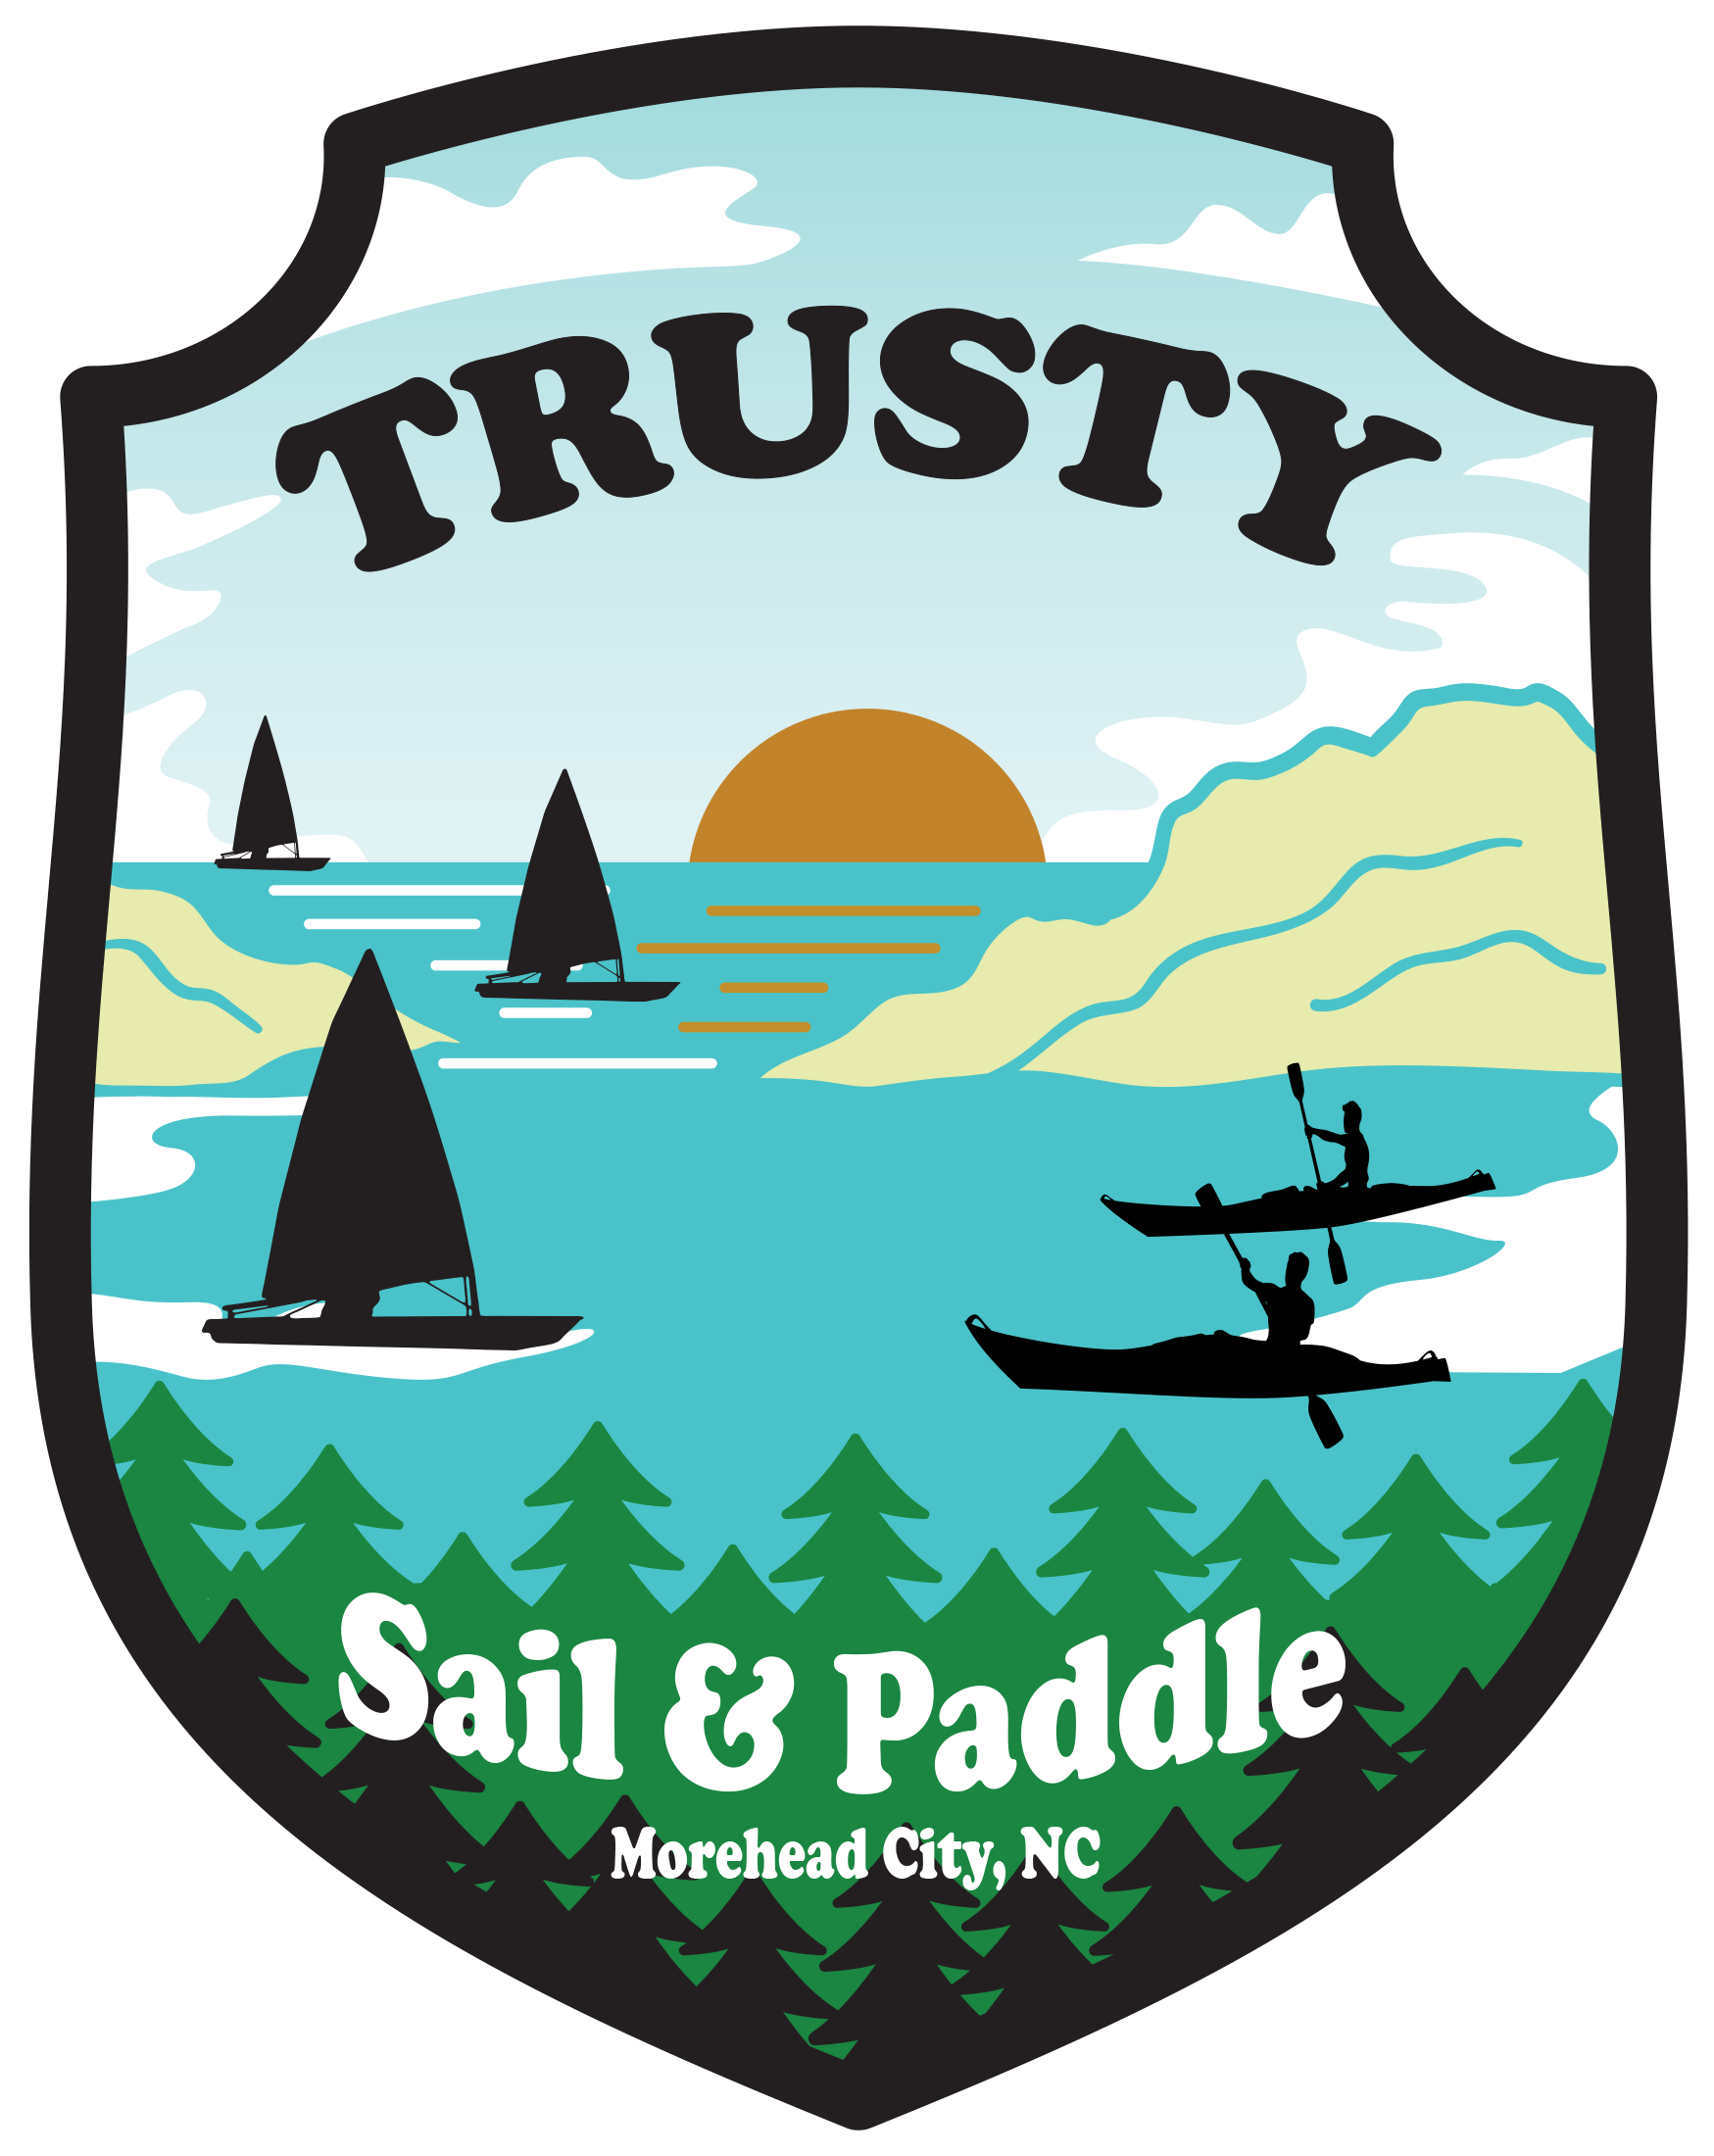 Sponsor Trusty Sail and Paddle